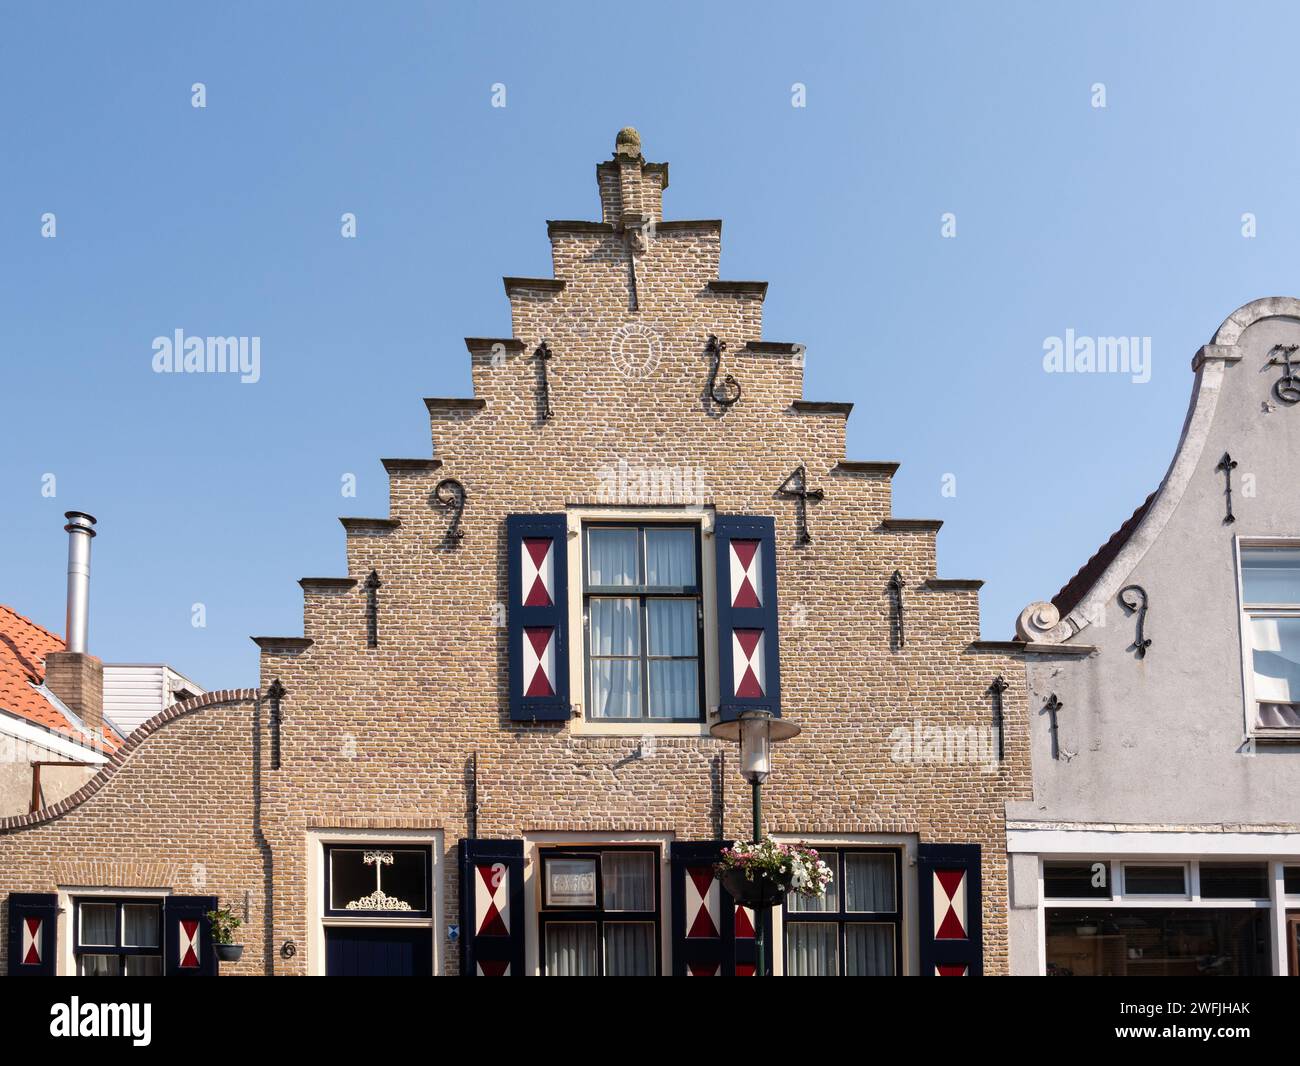 Stepped gable of house on Voorstraat in old town of Sint-Annaland, Tholen, Zeeland, Netherlands Stock Photo